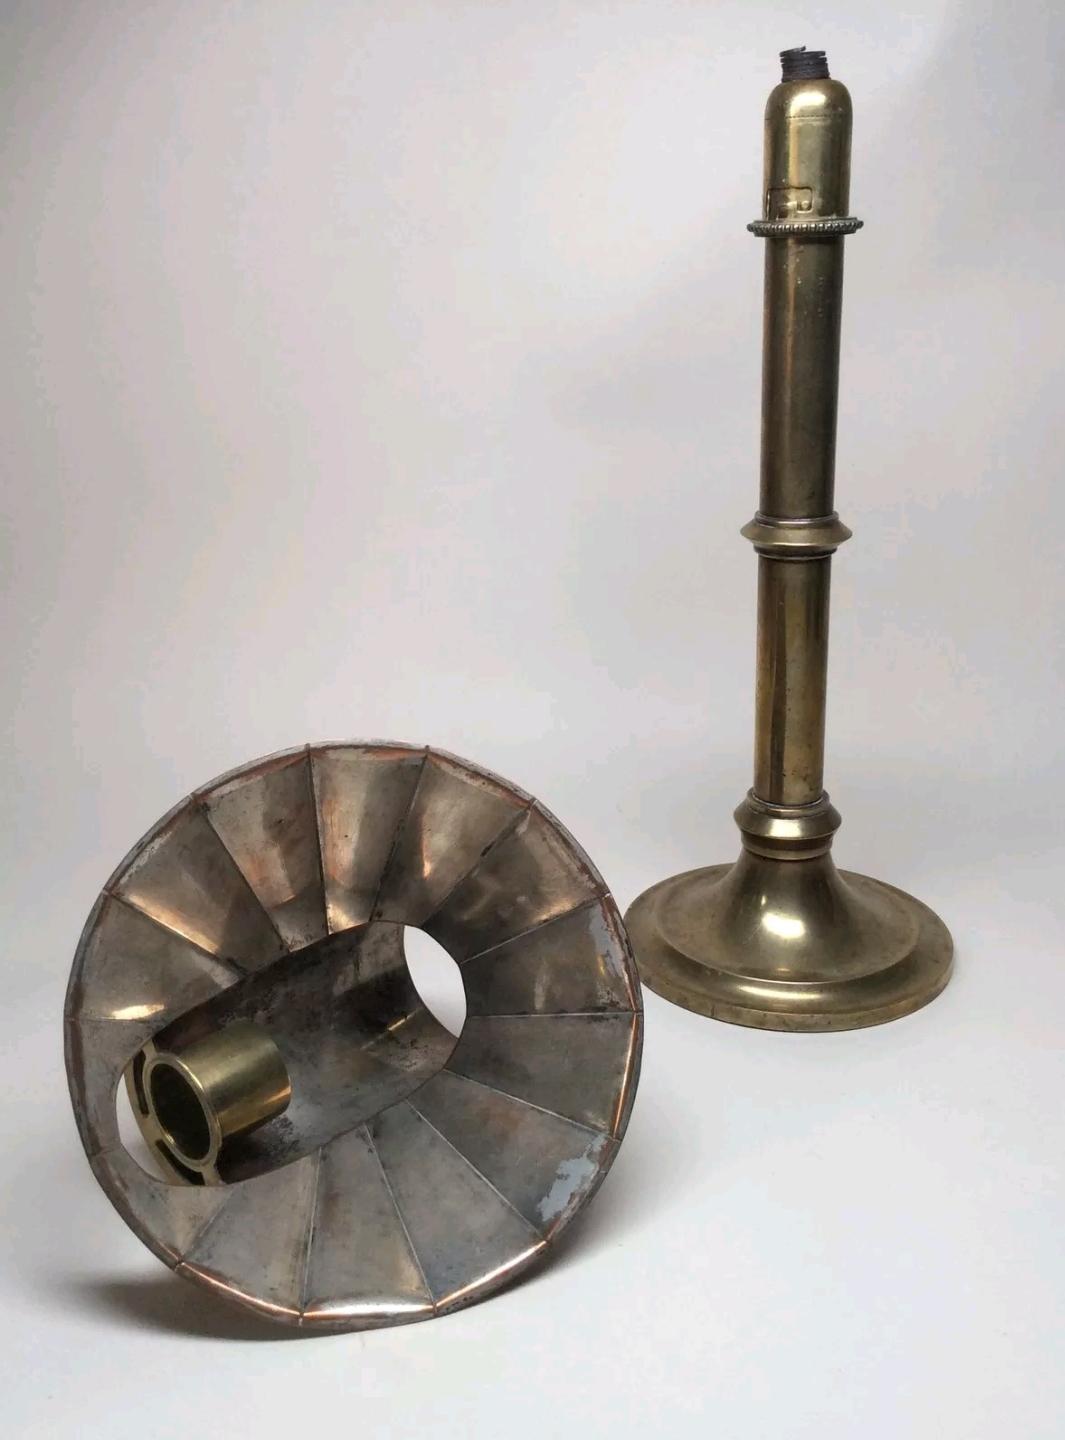 A very good example of this late Victorian spring loaded students candle stand with copper reflector hood that has a silvered reflective surface on the inside. The spring is original and working well, it has not been polished so it retains a nice